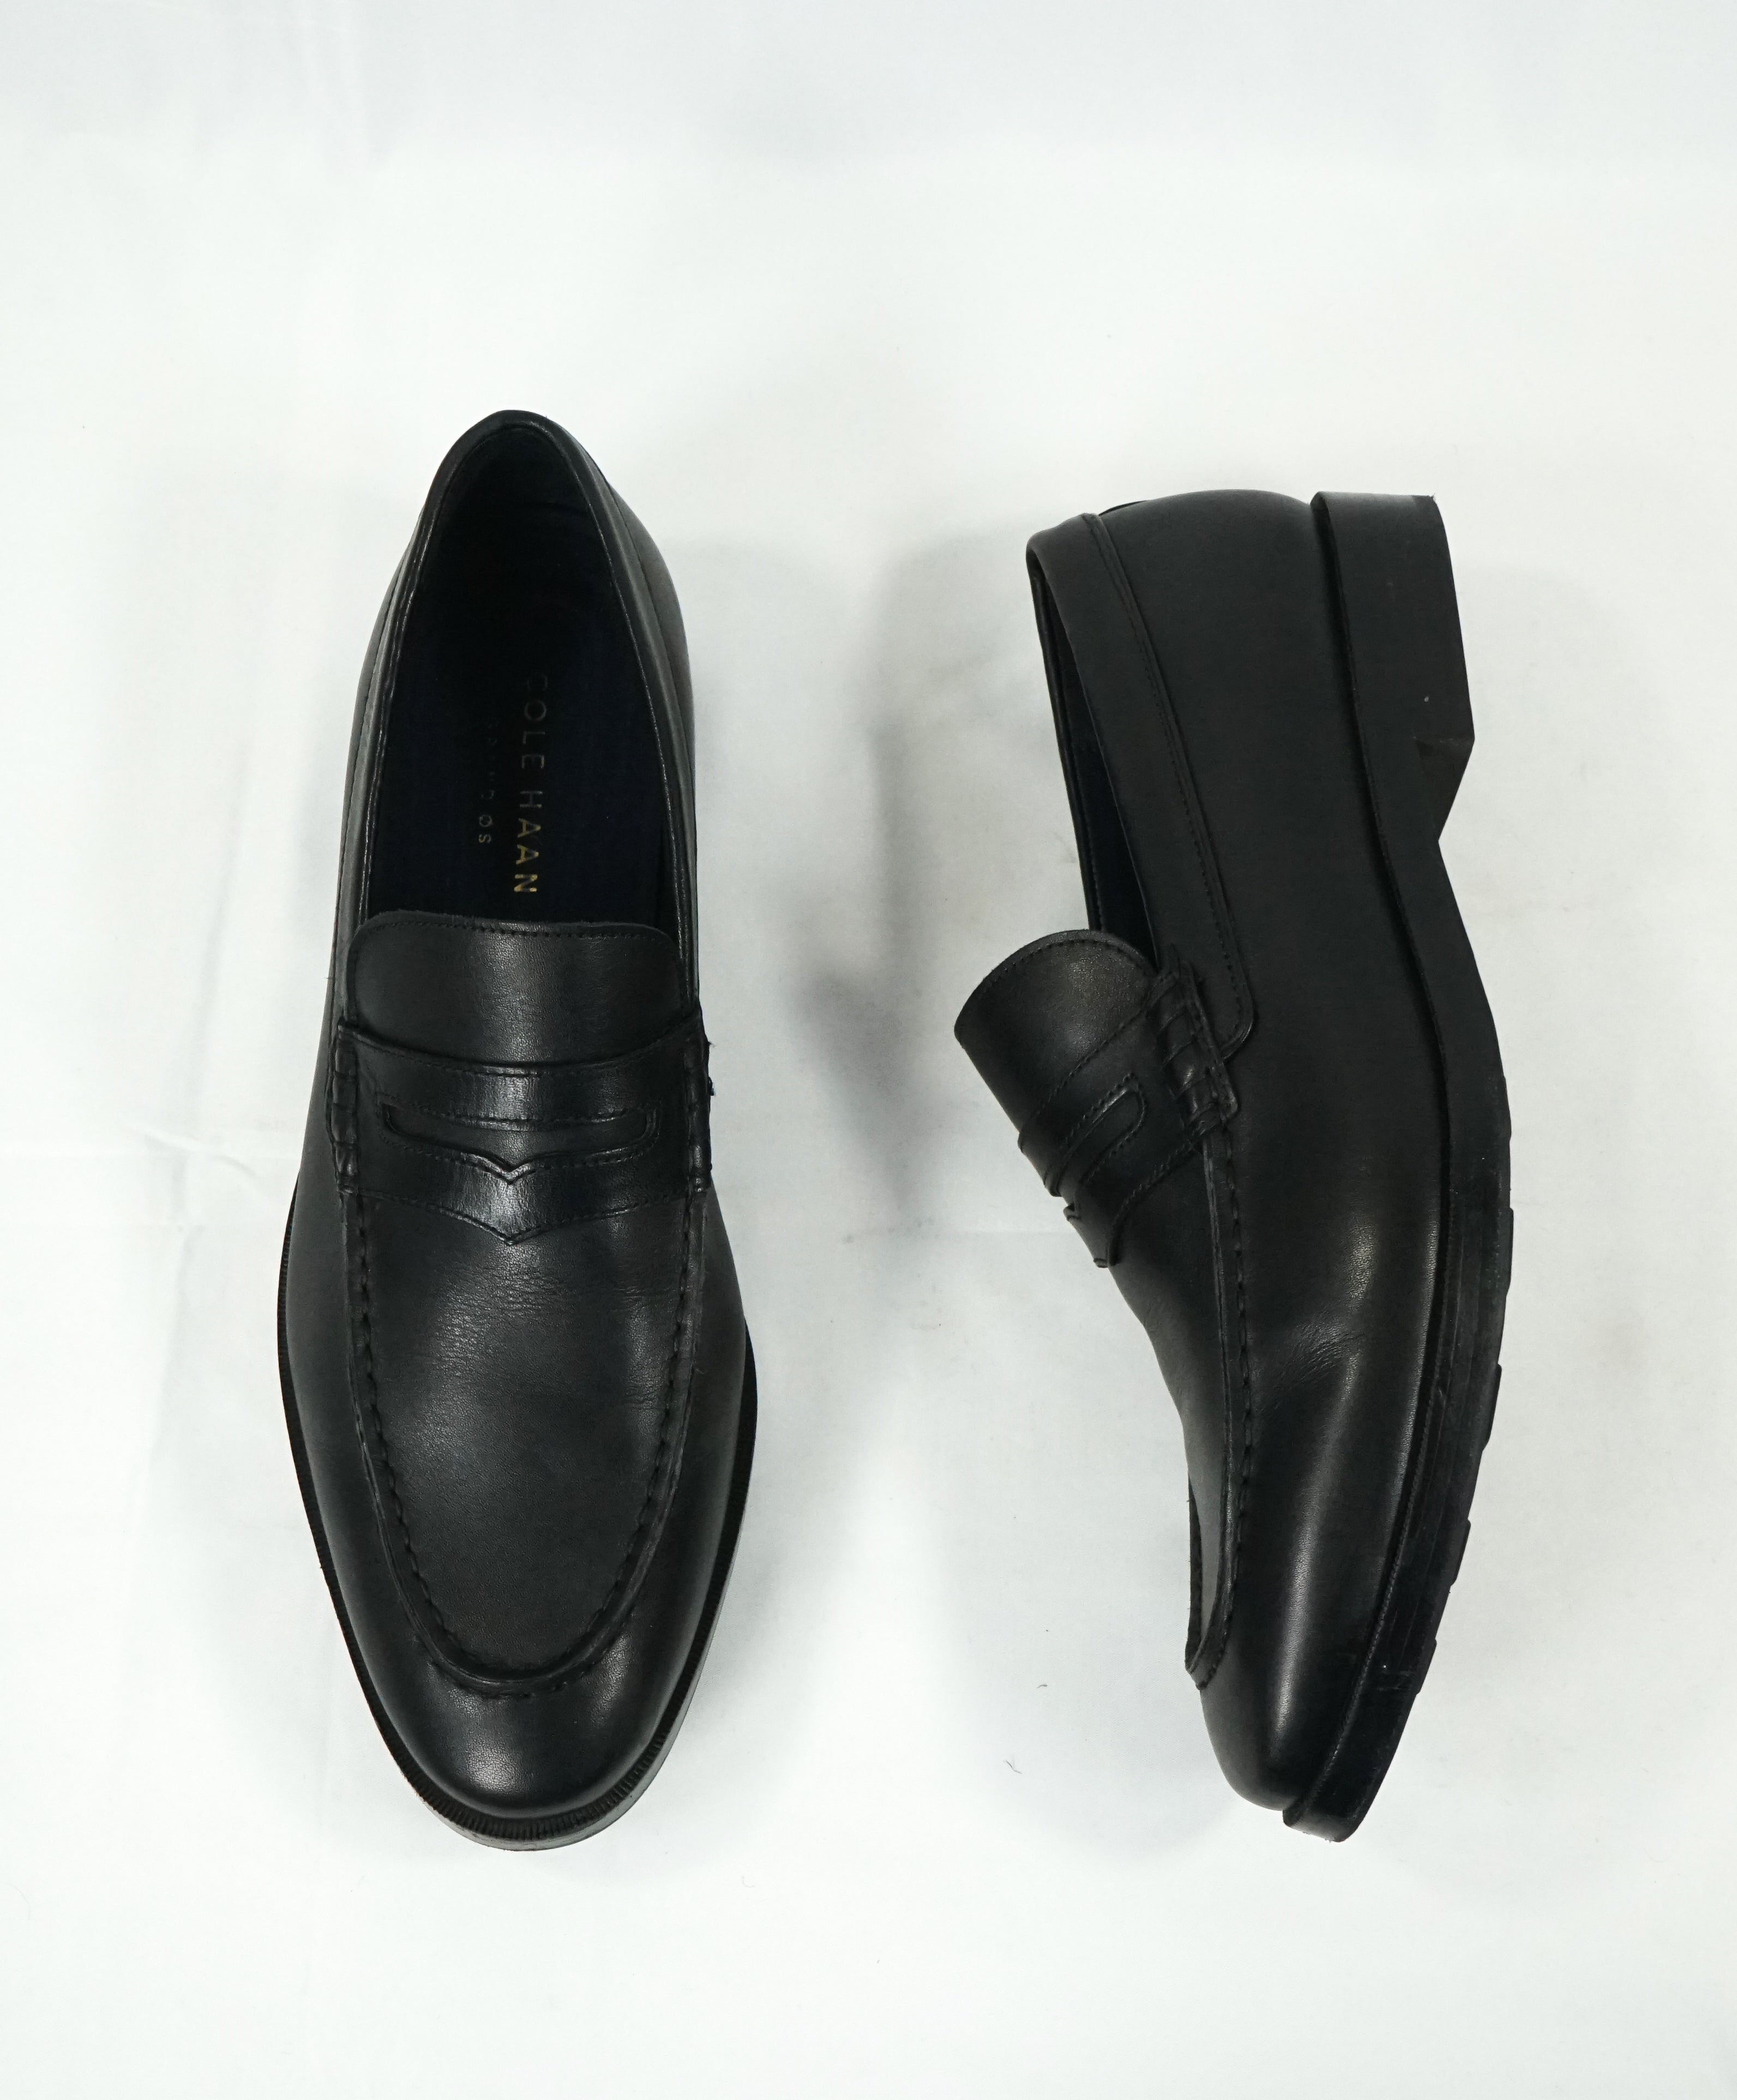 COLE HAAN - Grand OS Black V Penny 